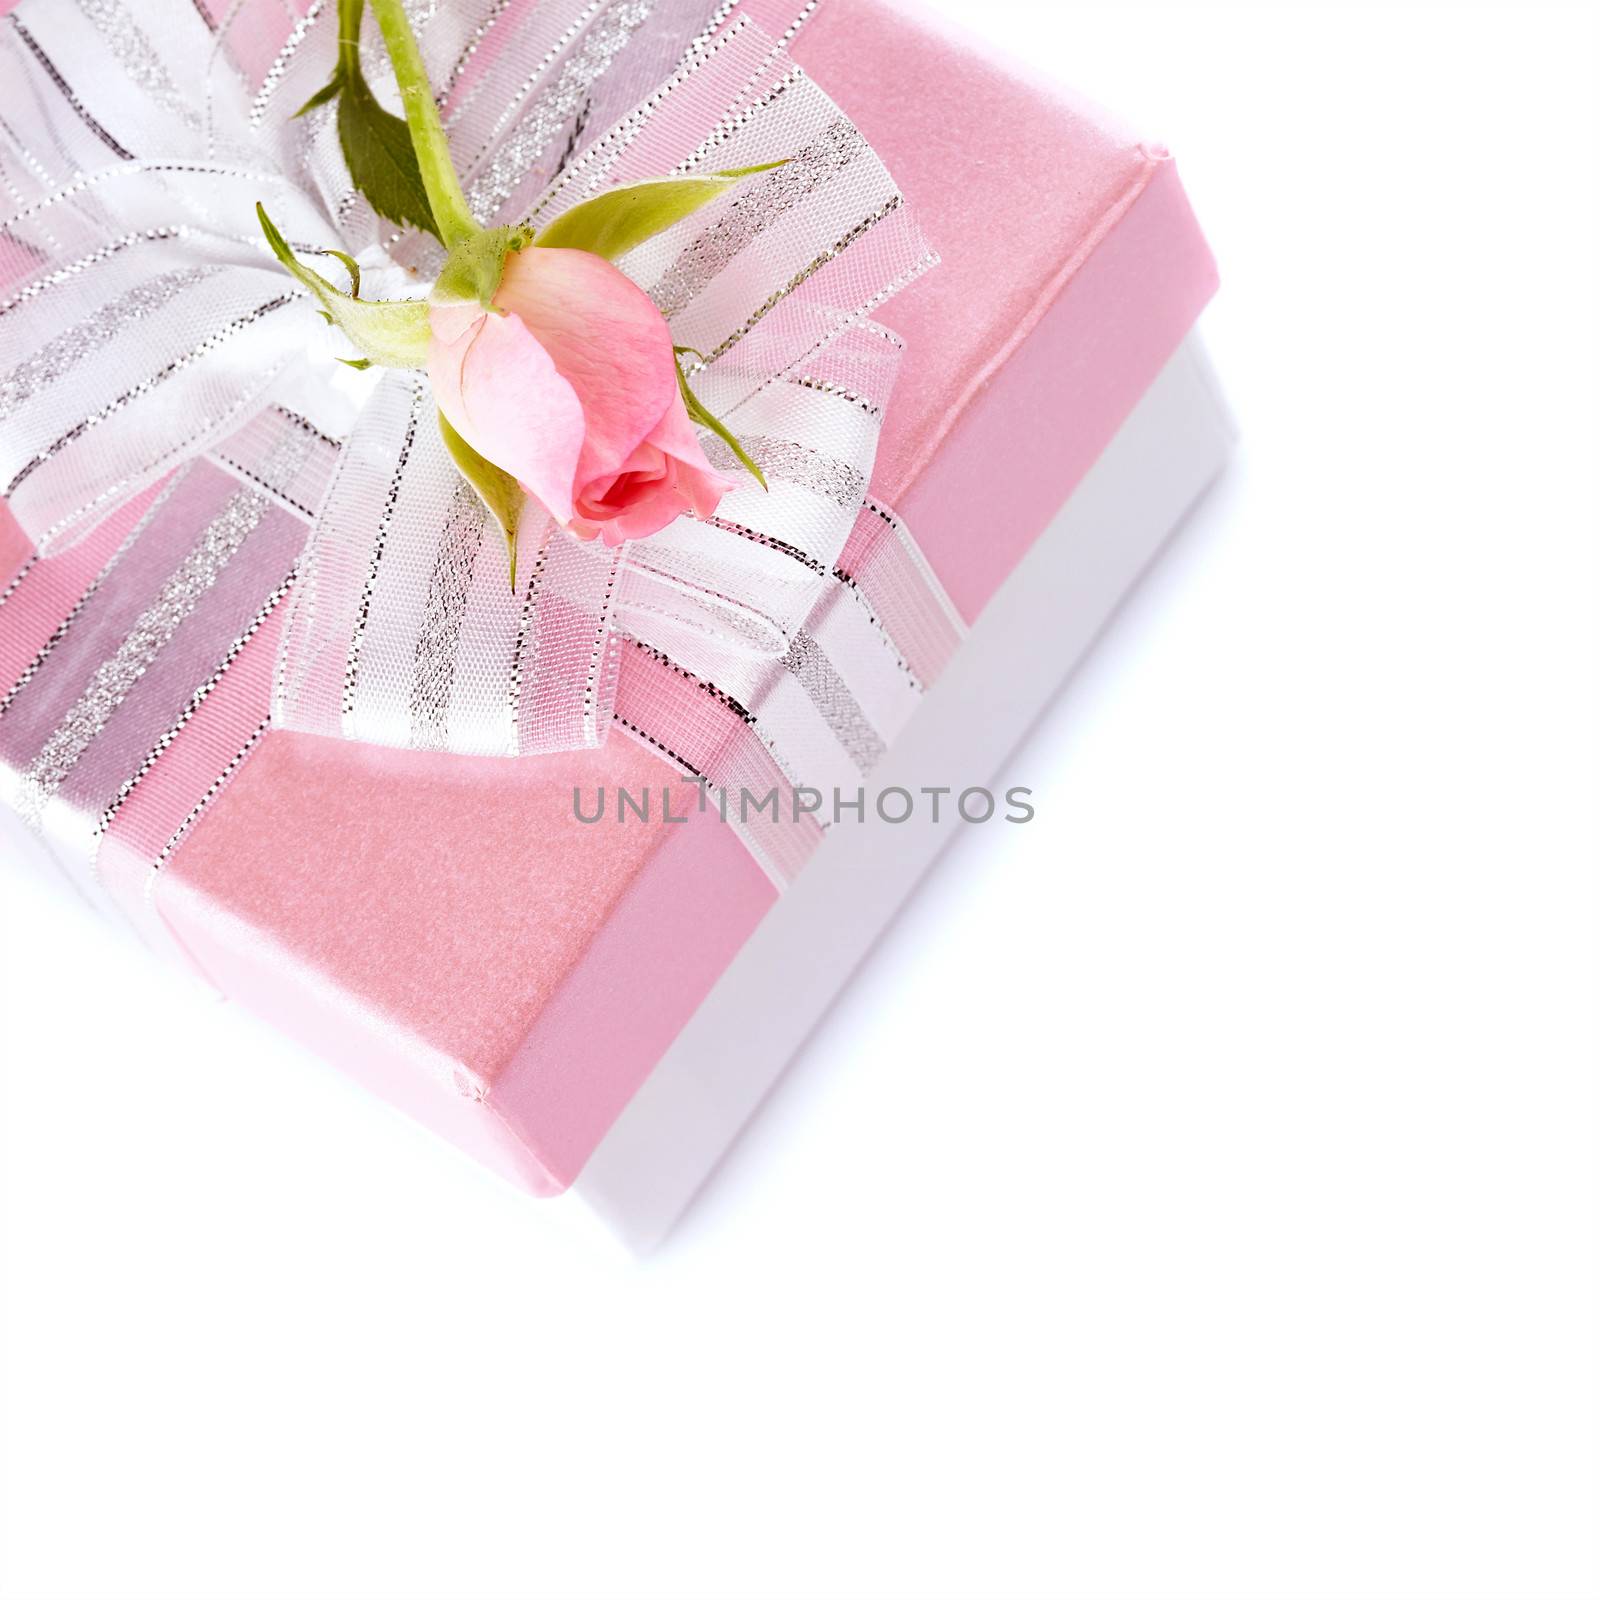 Gift box and roses. Festive surprise. Box with a bow. Elegant gift.